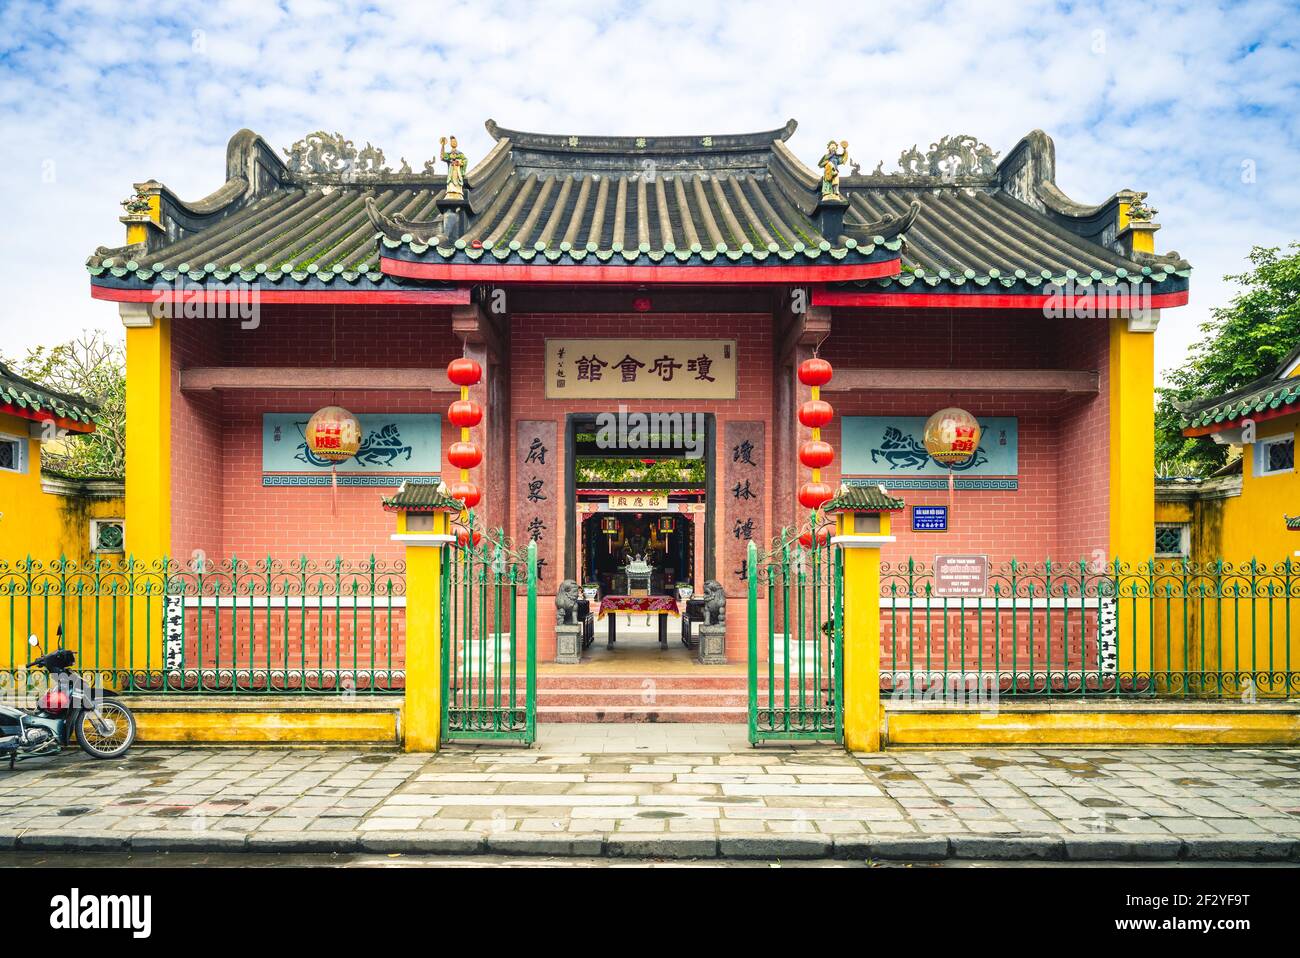 January 1, 2018: Assembly Hall of the Hainan Chinese Congregation built in 1851, is a memorial to 108 merchants from Hainan Island who were mistaken f Stock Photo